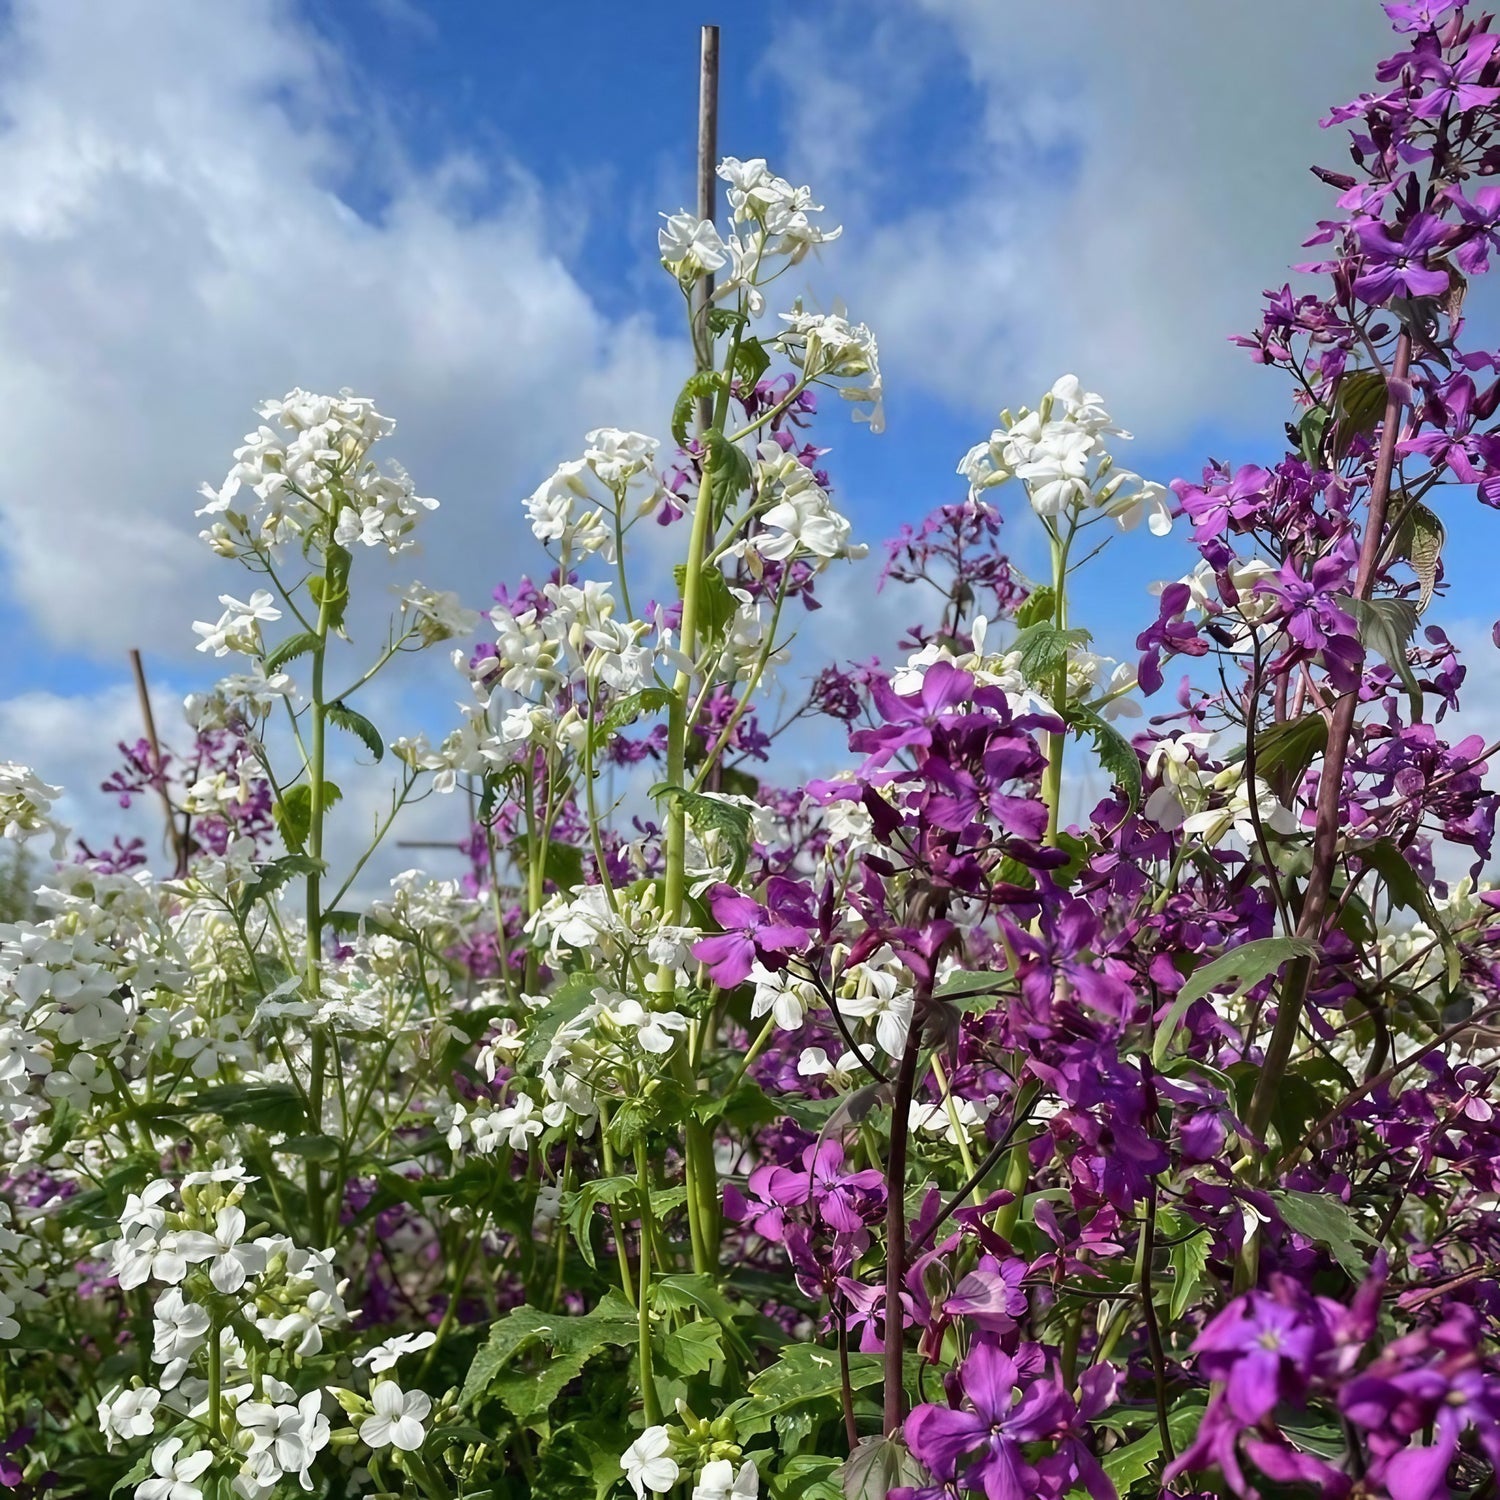 Honesty flowers adding a splash of purple and white to a lush garden setting